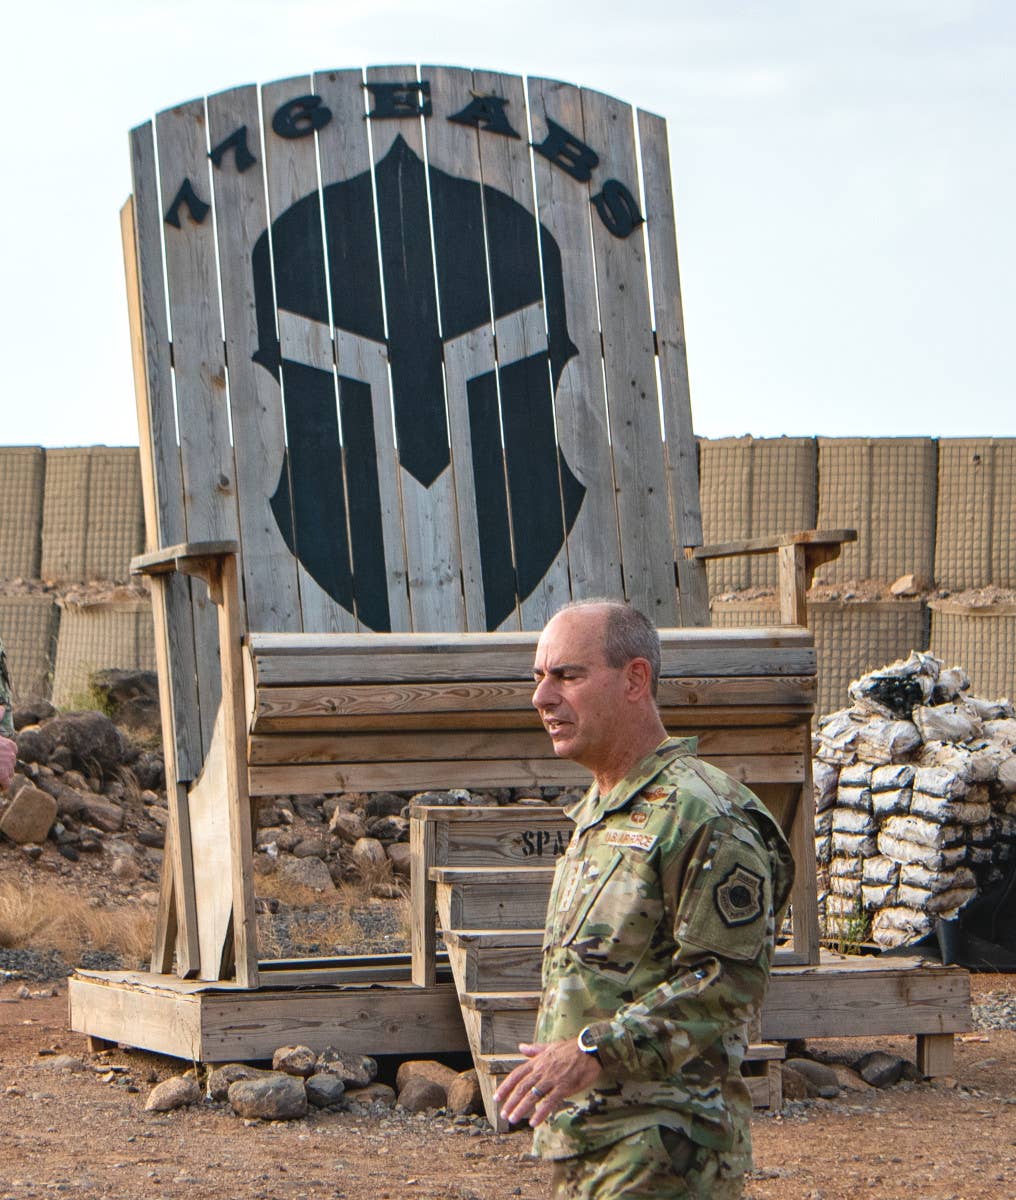 An oversized wooden chair at Chabelley Airfield belonging to the 776th Expeditionary Air Base Squadron (EABS) with a Spartan helmet motif.